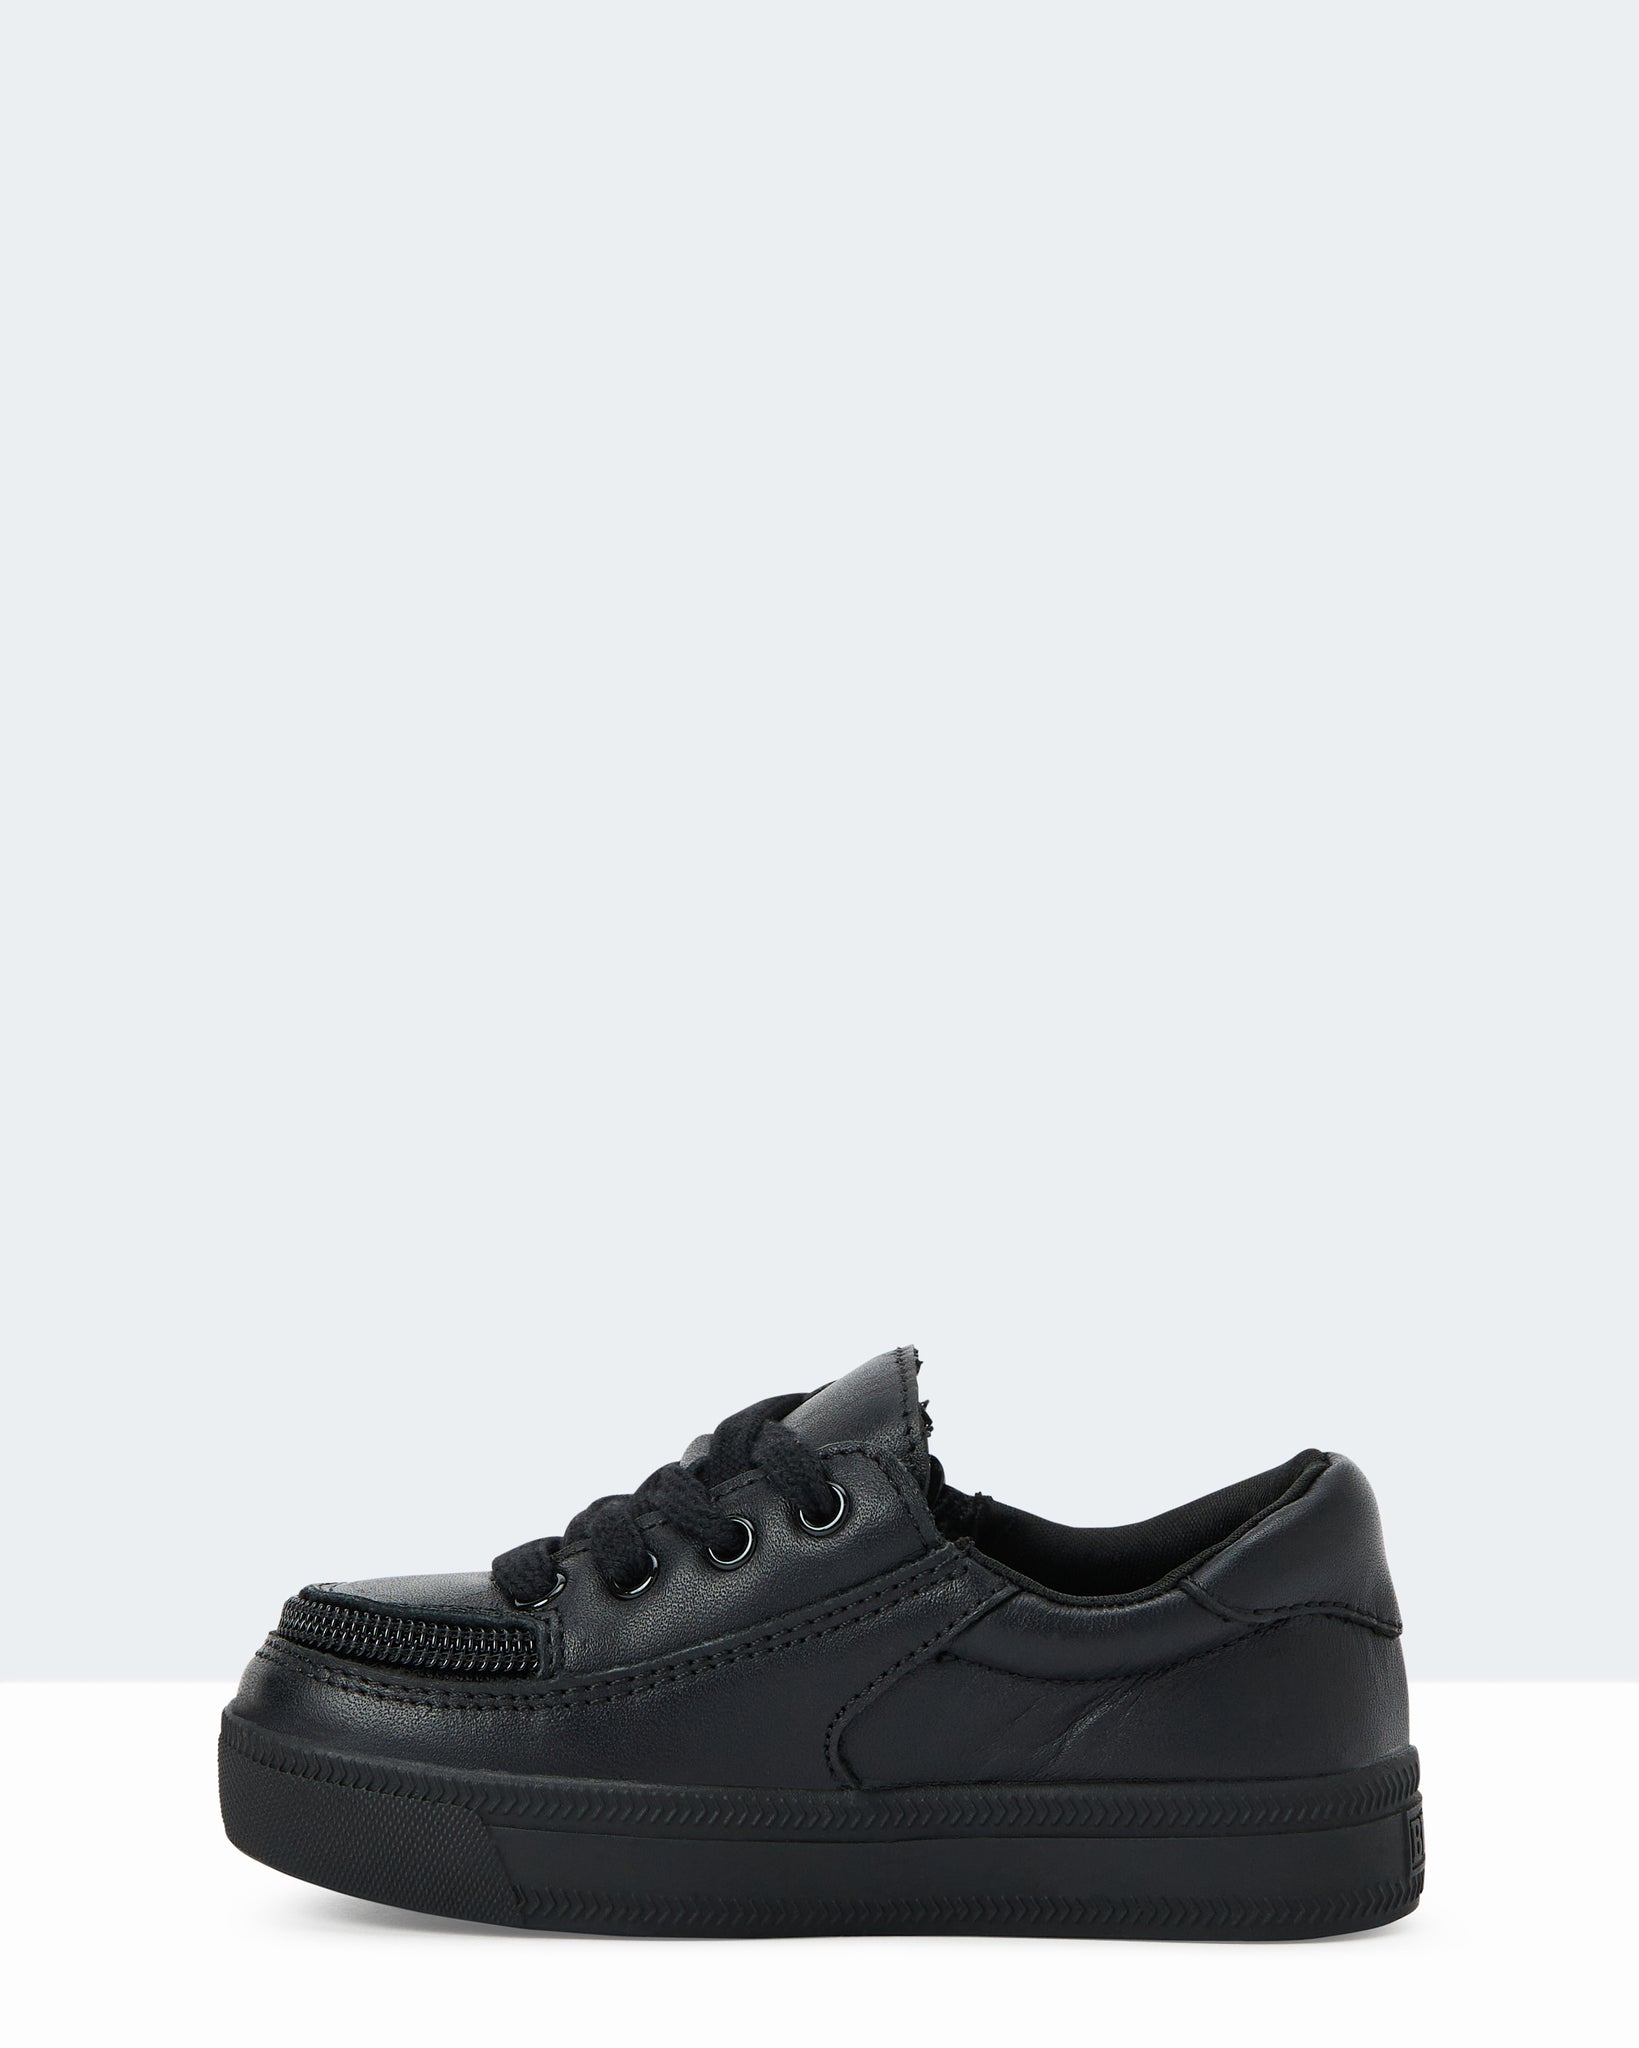 Low Rise Sneaker (Toddler) - Black to the Floor Faux Leather